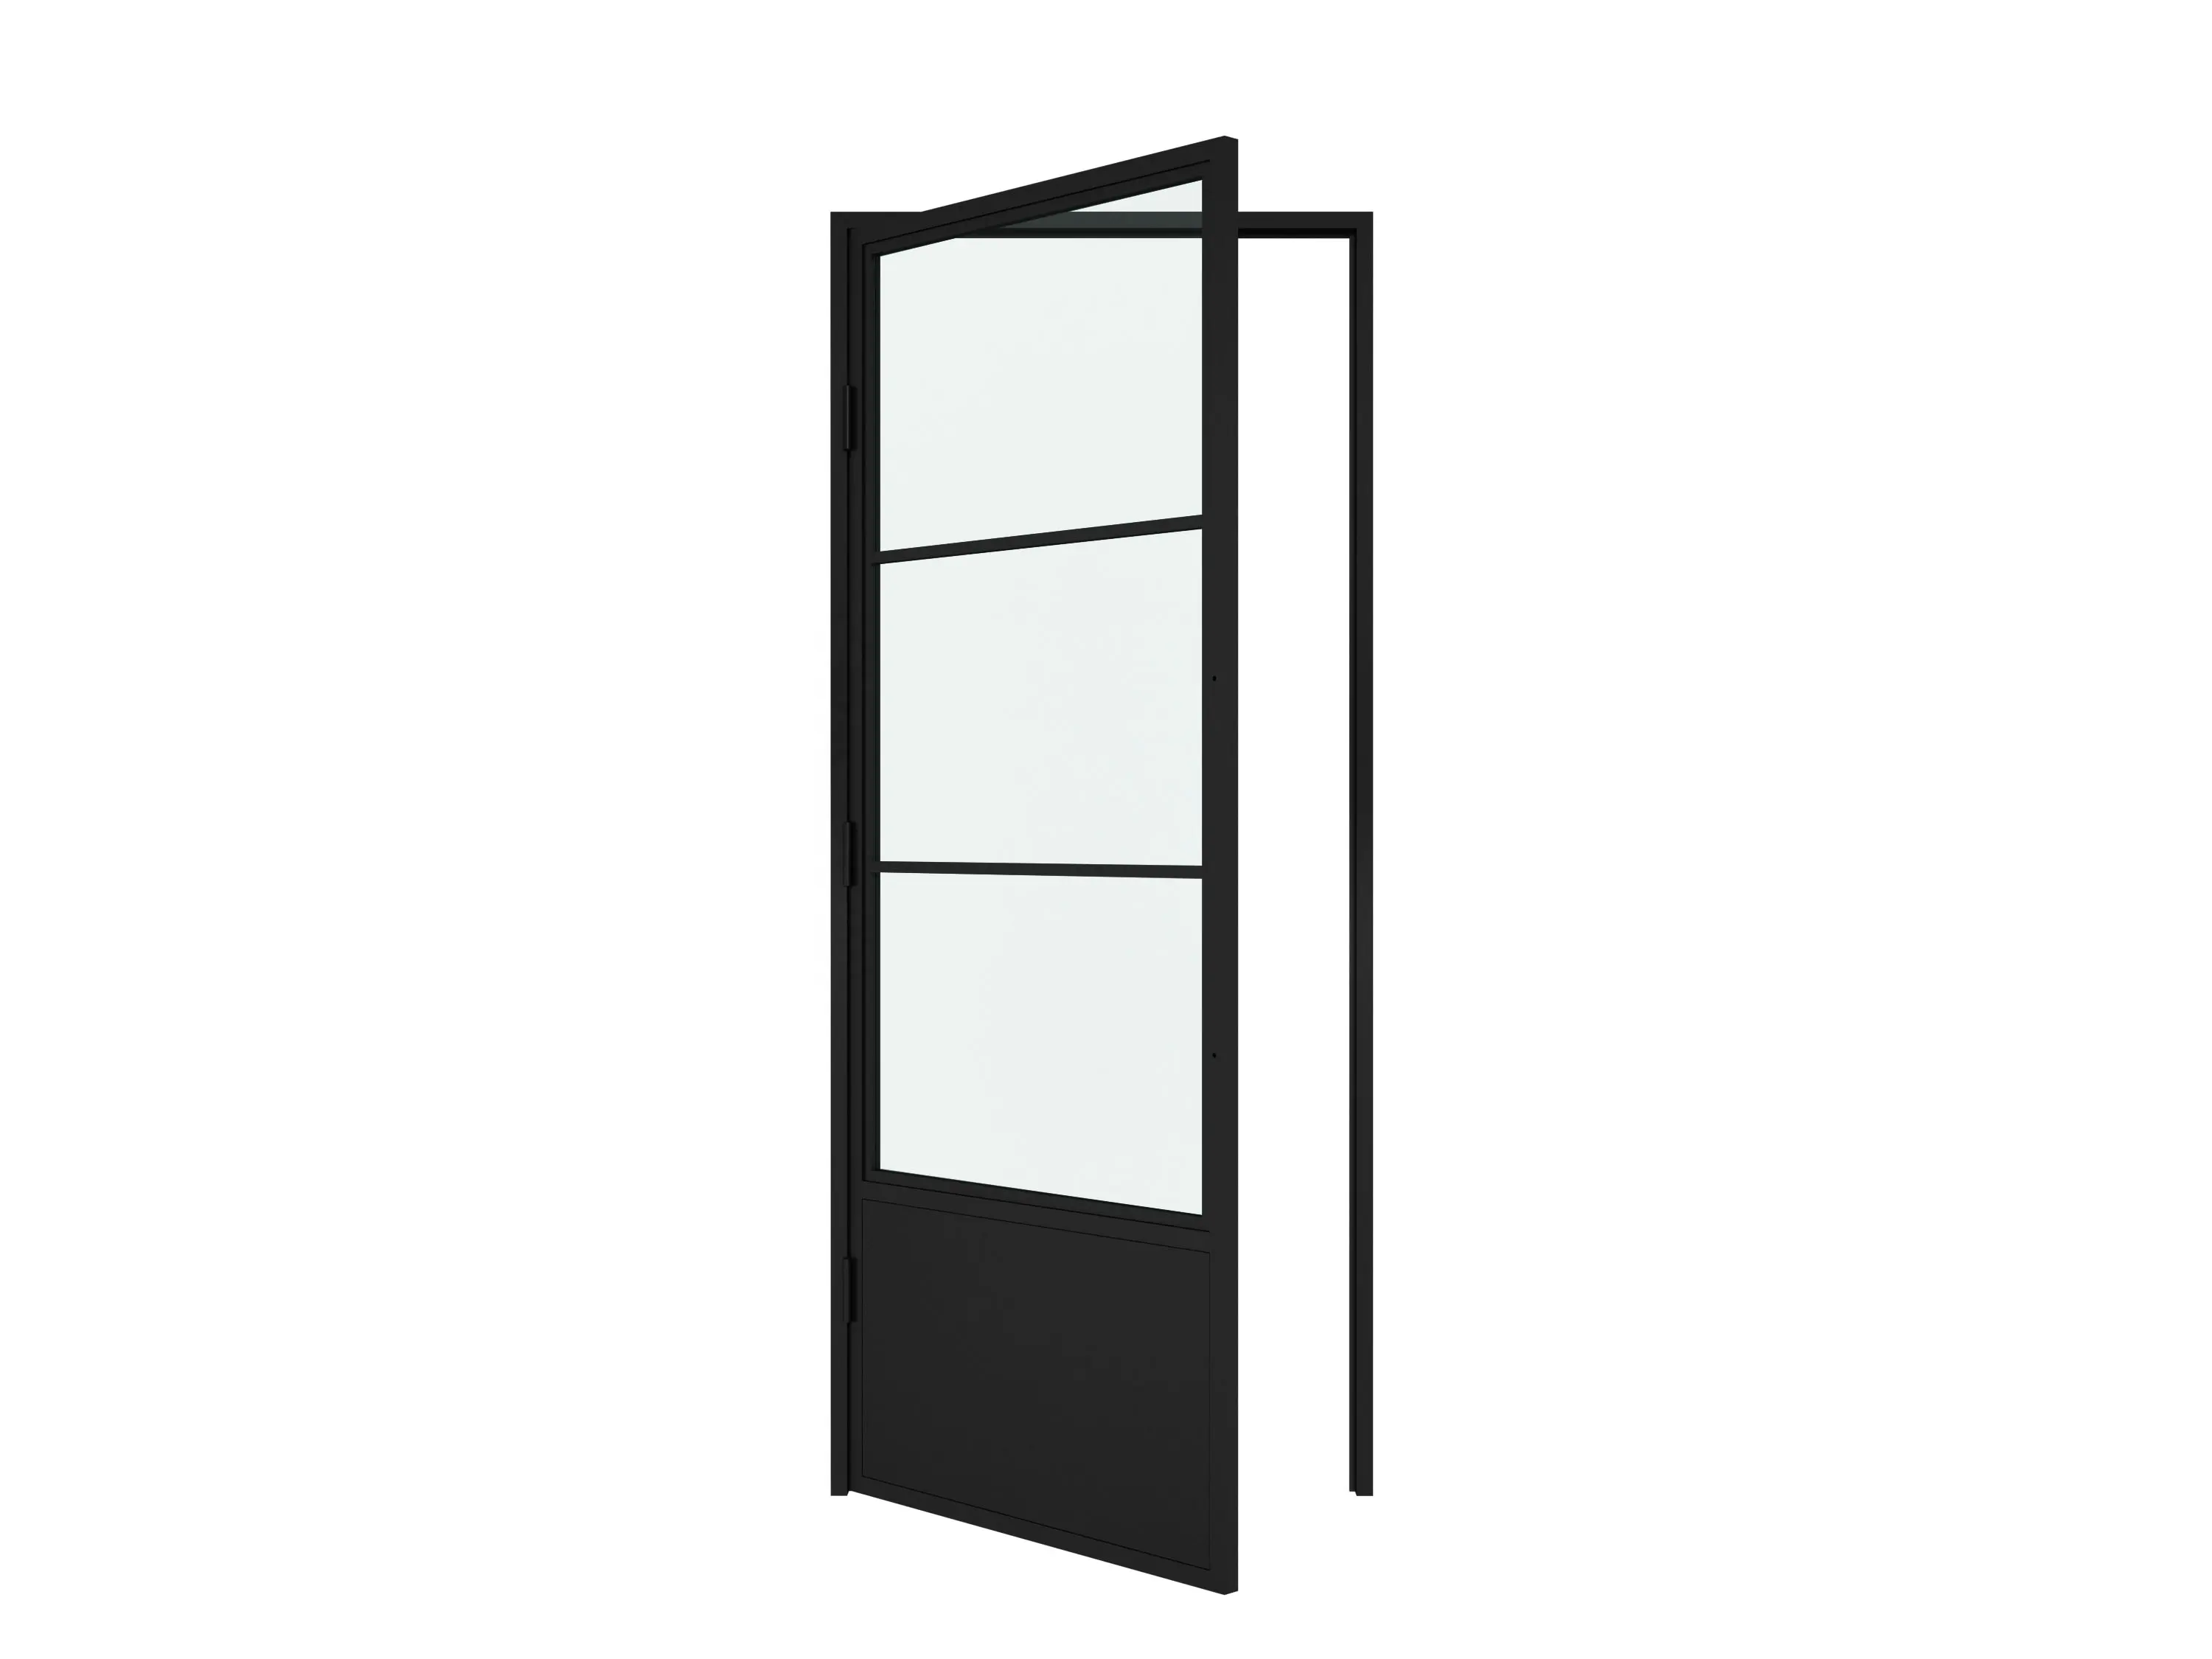 French Style Glass Door and Steel Framed Swing Glass Door with lock  lock door with glass and steel frame